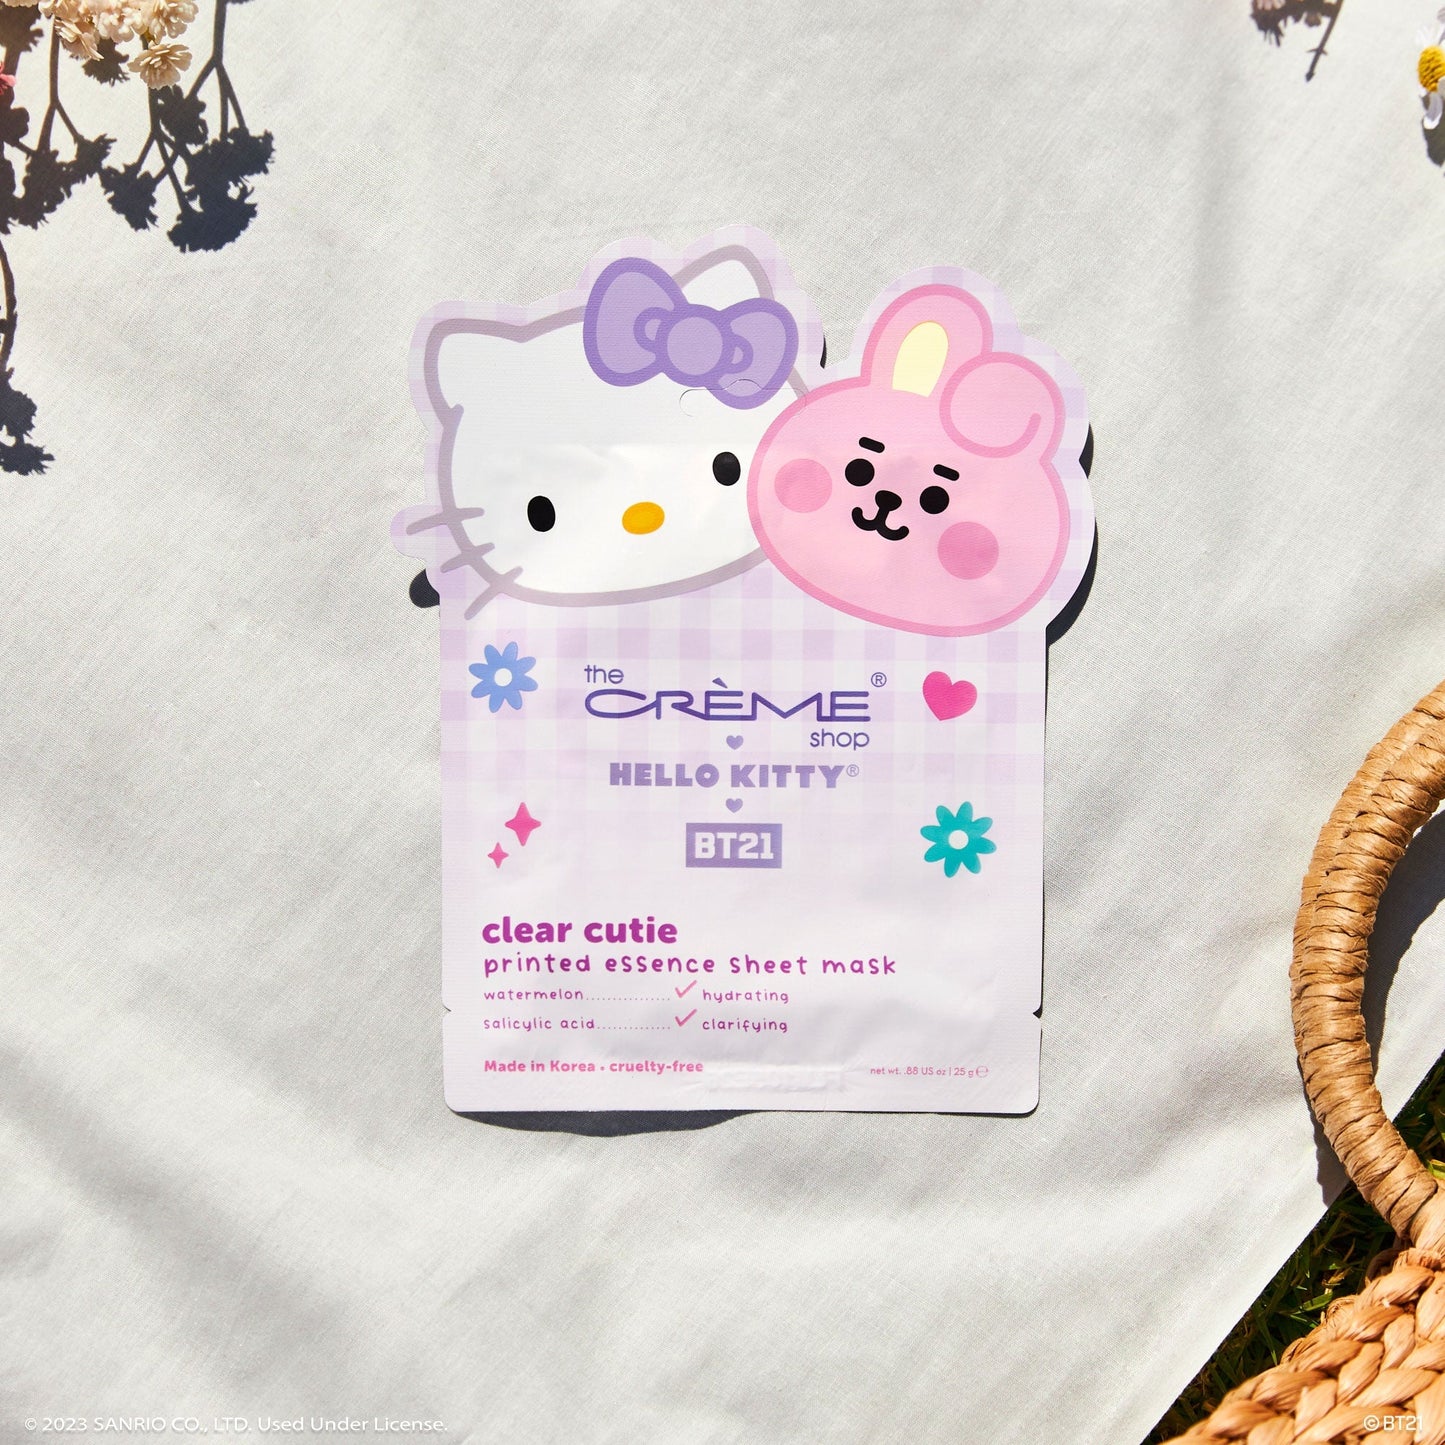 Hello Kitty & BT21 Clear Cutie Printed Essence Sheet Mask with Watermelon and Salicylic Acid, $4